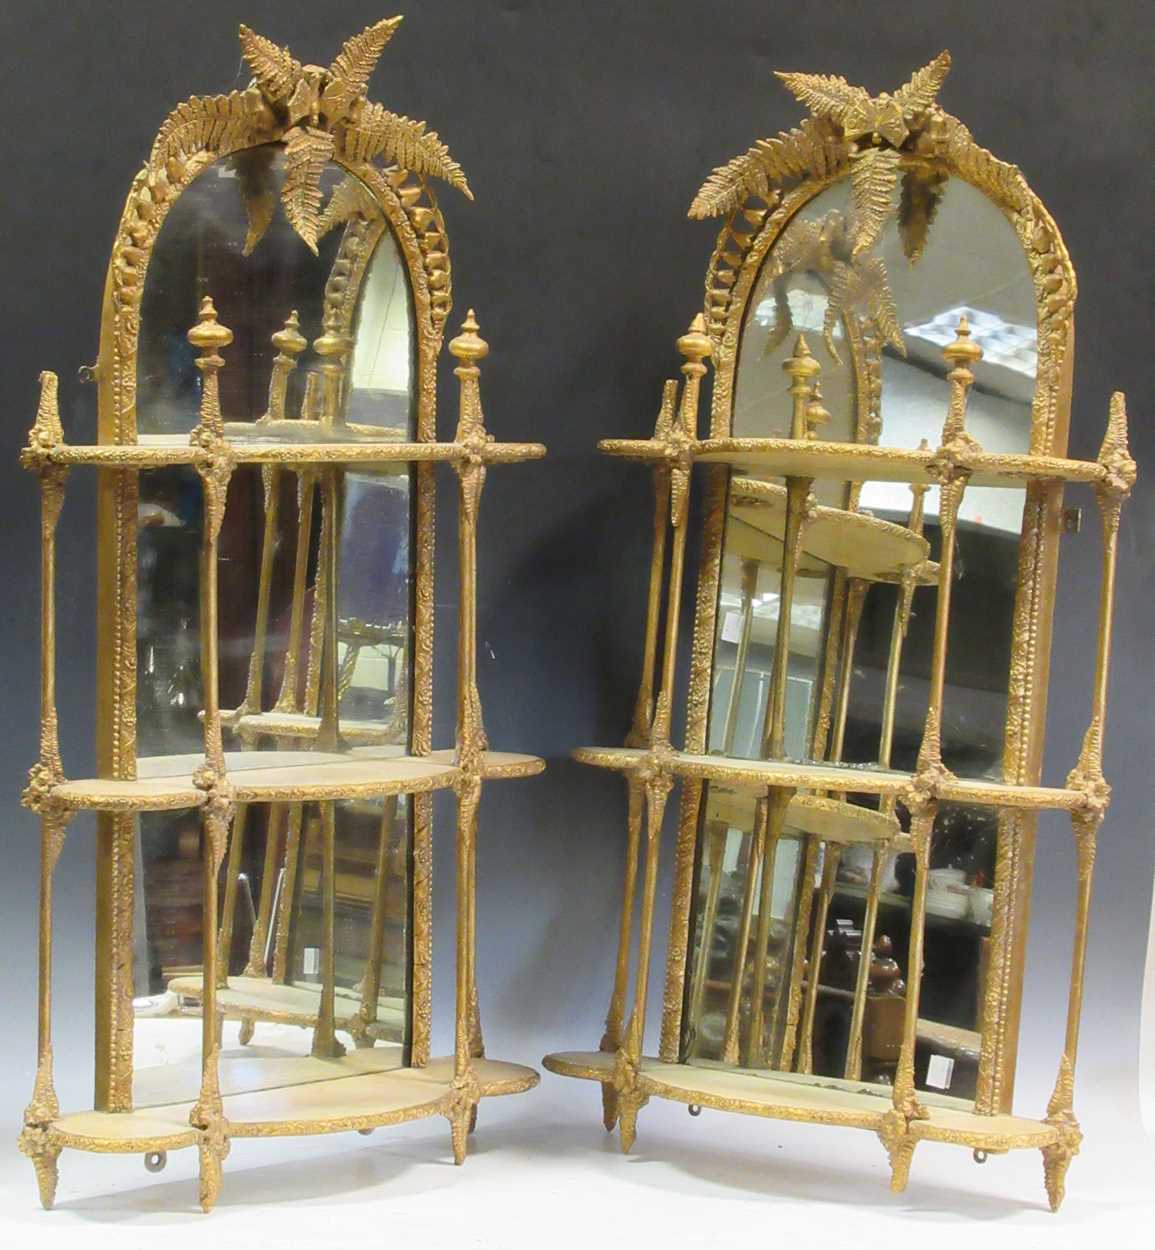 A near pair of Victorian gilt wall-mounted mirror backed etageres, with fern leaf crests and three